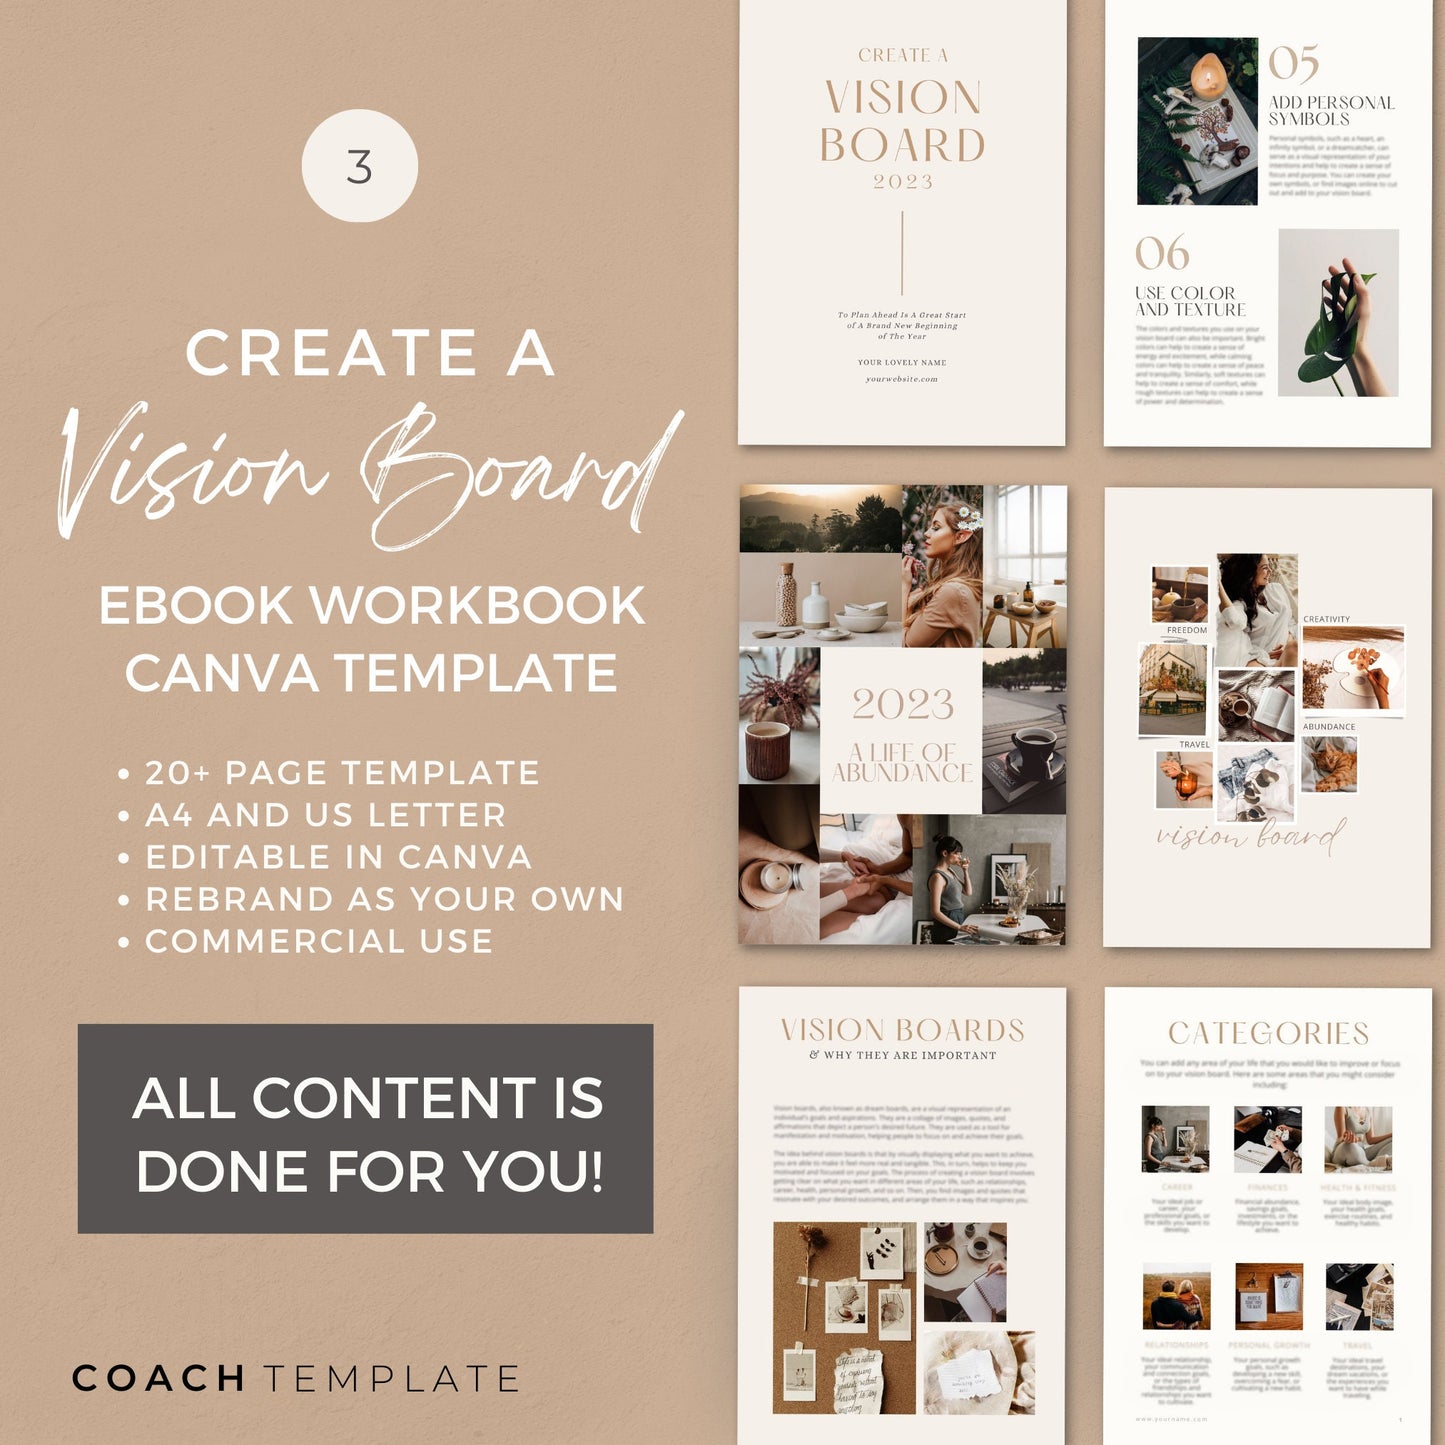 Ultimate Manifesting Canva Template Bundle | Coaching Template | For Life, Wellness, Mindset Coaching and Online Business | Commercial Use Coachtemplate.com CT061